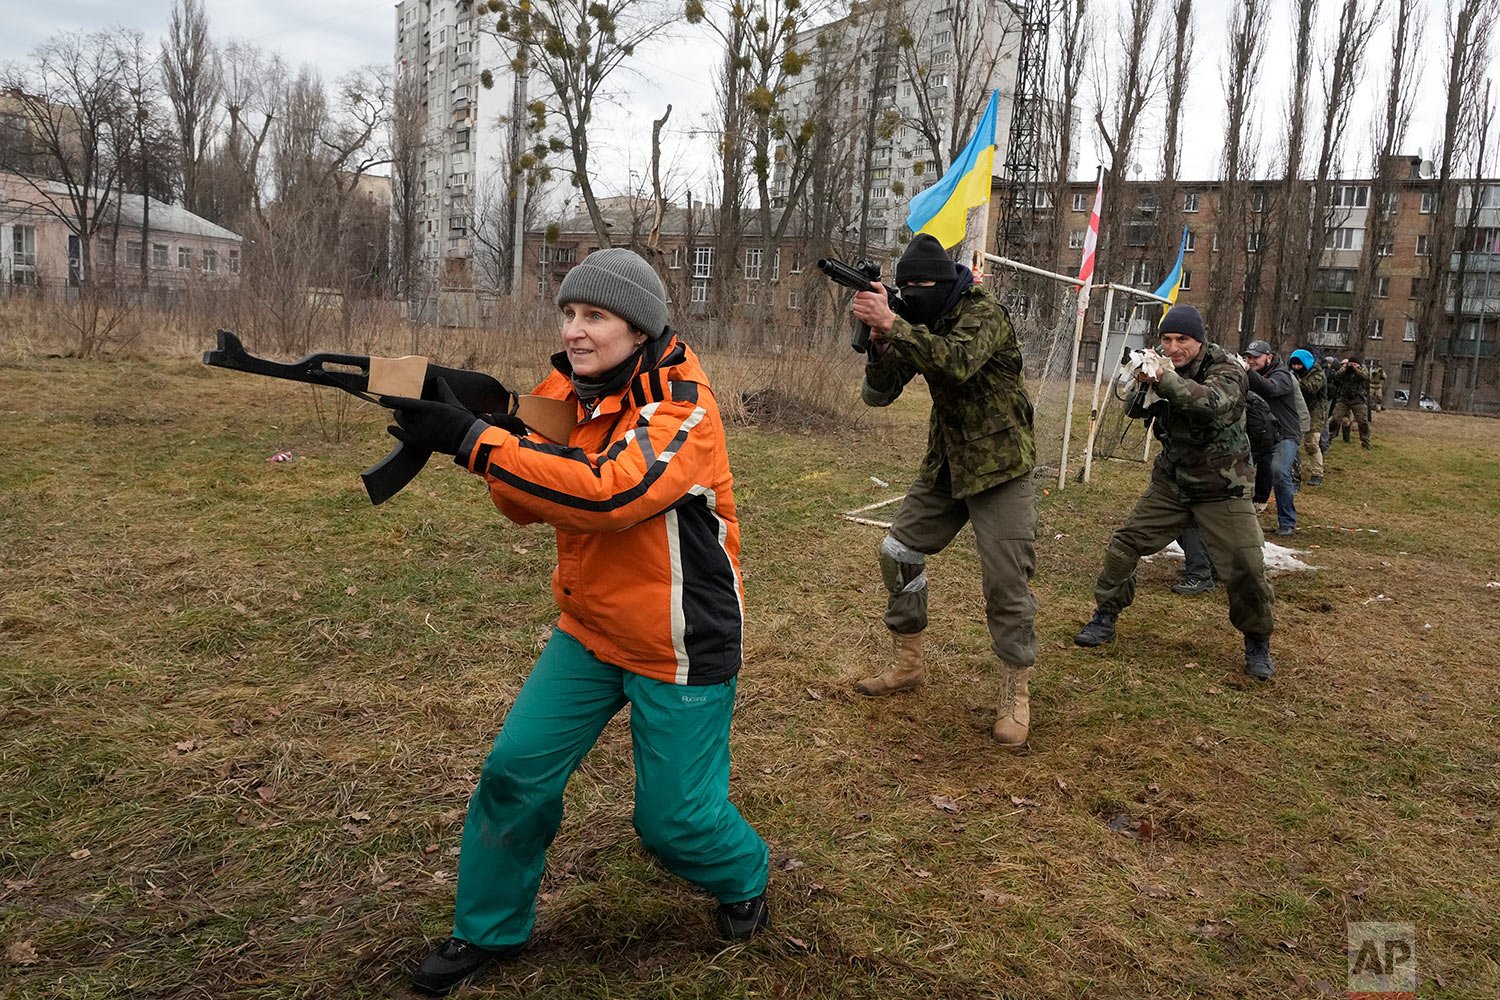  Civilians train with members of the Georgian Legion, a paramilitary unit formed mainly by ethnic Georgian volunteers to fight against Russian forces in Ukraine in 2014, in Kyiv, Ukraine, Saturday, Feb. 19, 2022. (AP Photo/Efrem Lukatsky) 